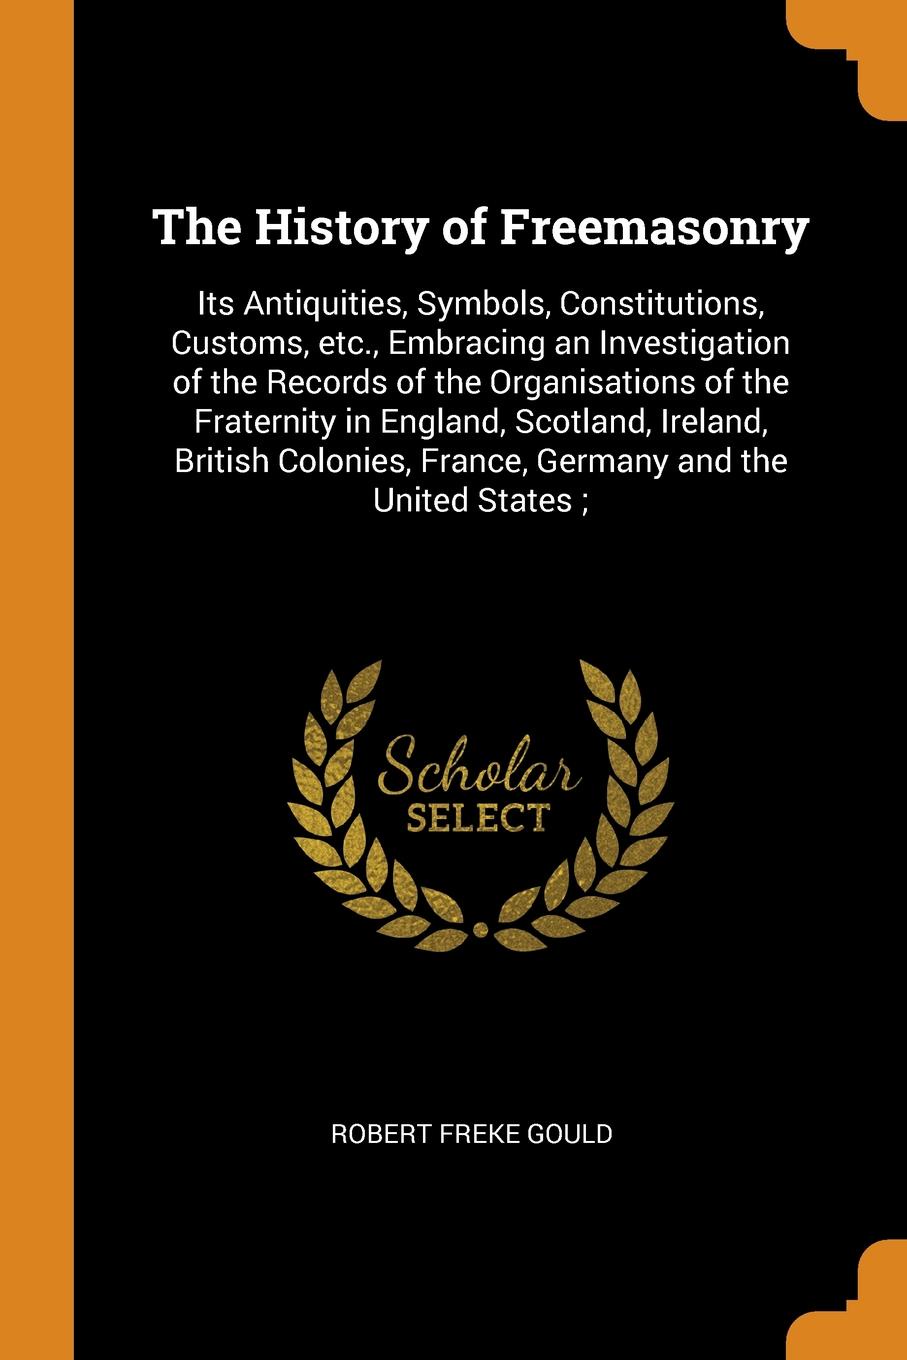 The History of Freemasonry. Its Antiquities, Symbols, Constitutions, Customs, etc., Embracing an Investigation of the Records of the Organisations of the Fraternity in England, Scotland, Ireland, British Colonies, France, Germany and the United St...